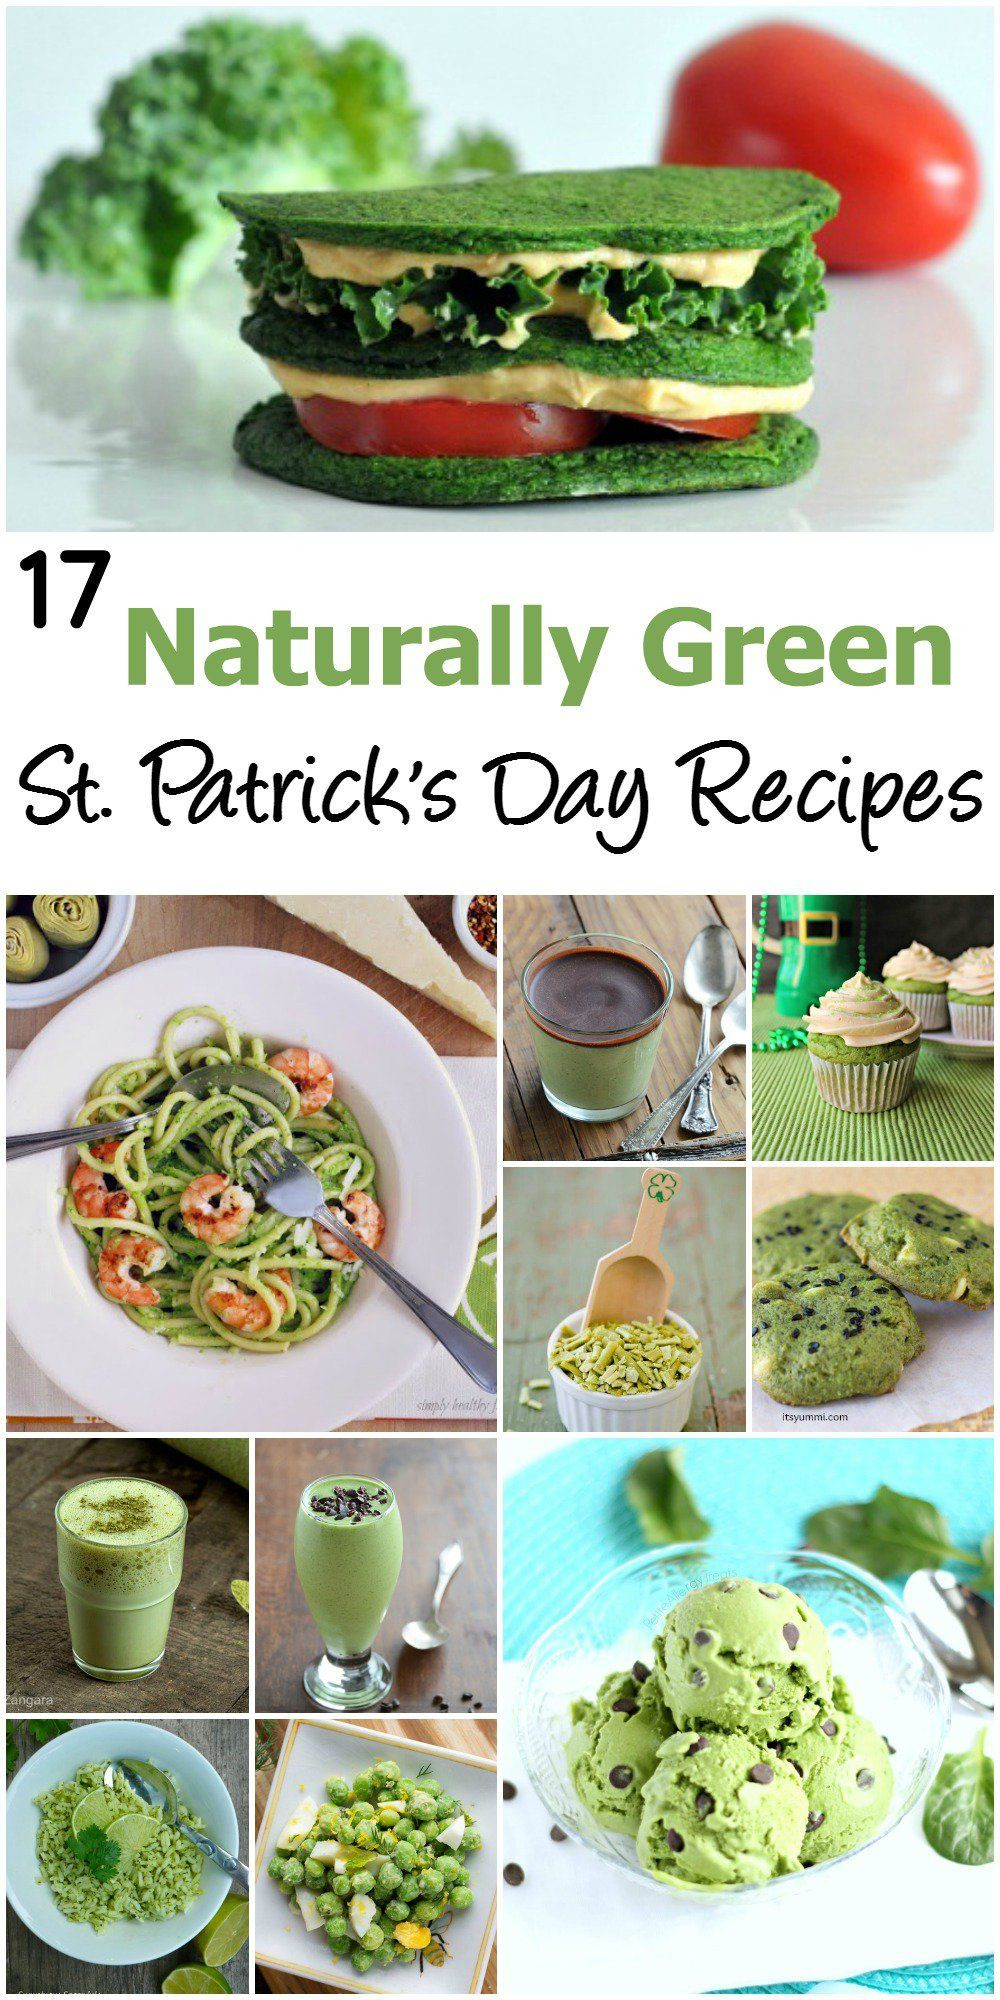 Recipes For St Patrick's Day Party
 Naturally Green Recipes for St Patrick s Day 17 for the